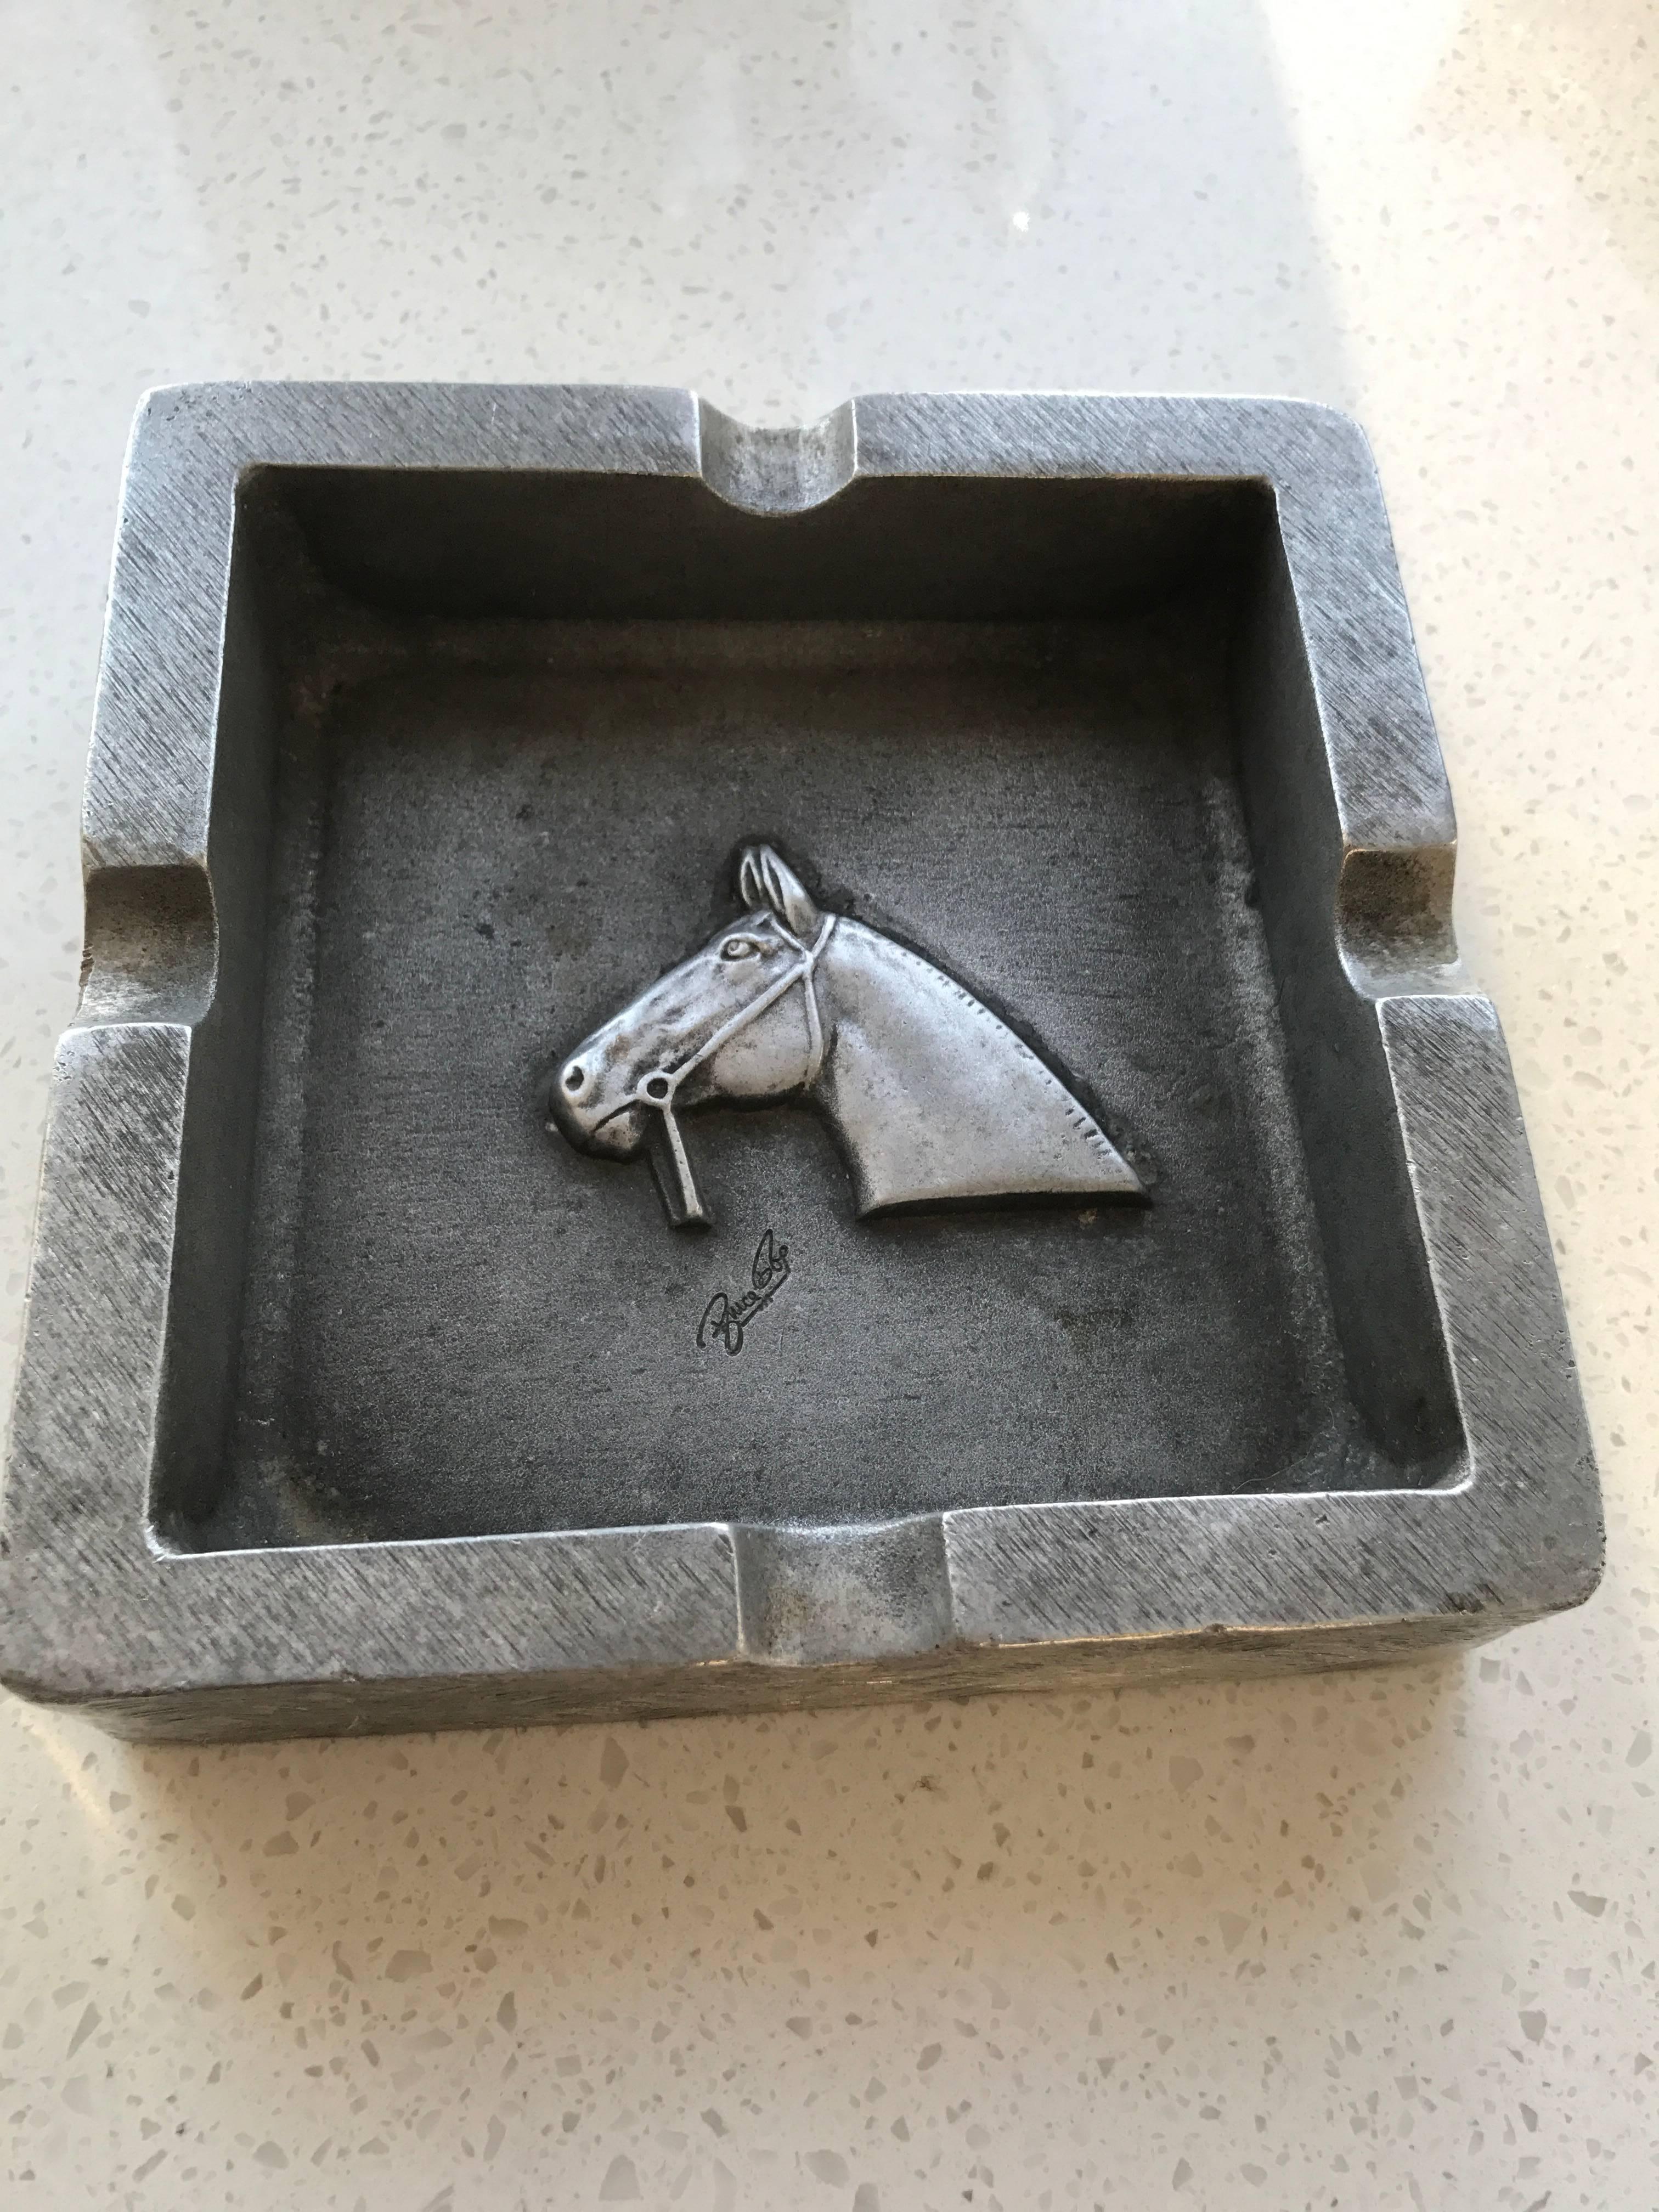 Mid-Century pewter ashtray with horse and bit theme. Hand-forged design in heavy weight cast pewter, with incised graphic lines along the borders, and fitted notches for cigarettes or cigars.